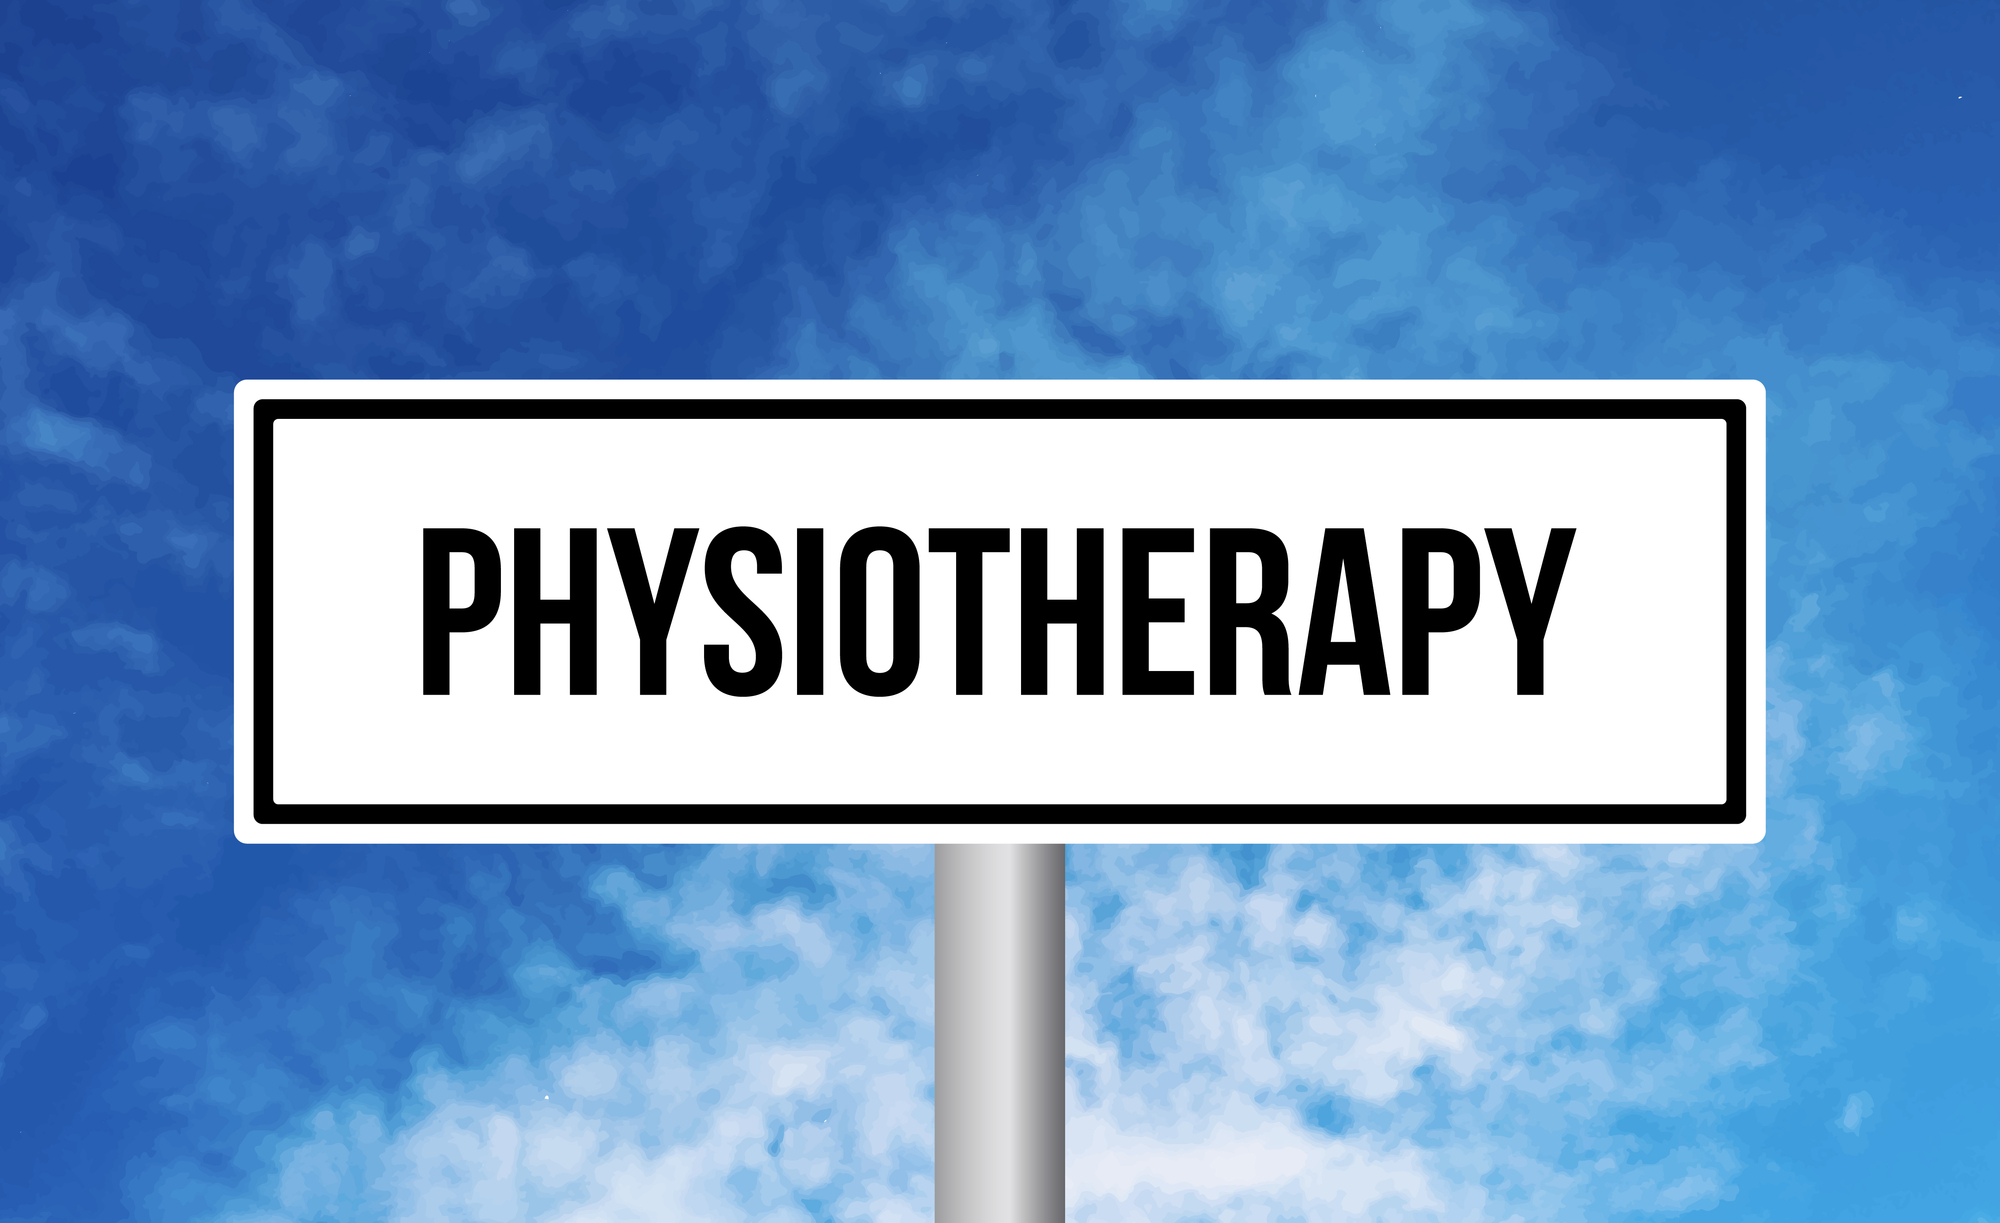 Physiotherapy Business for Sale